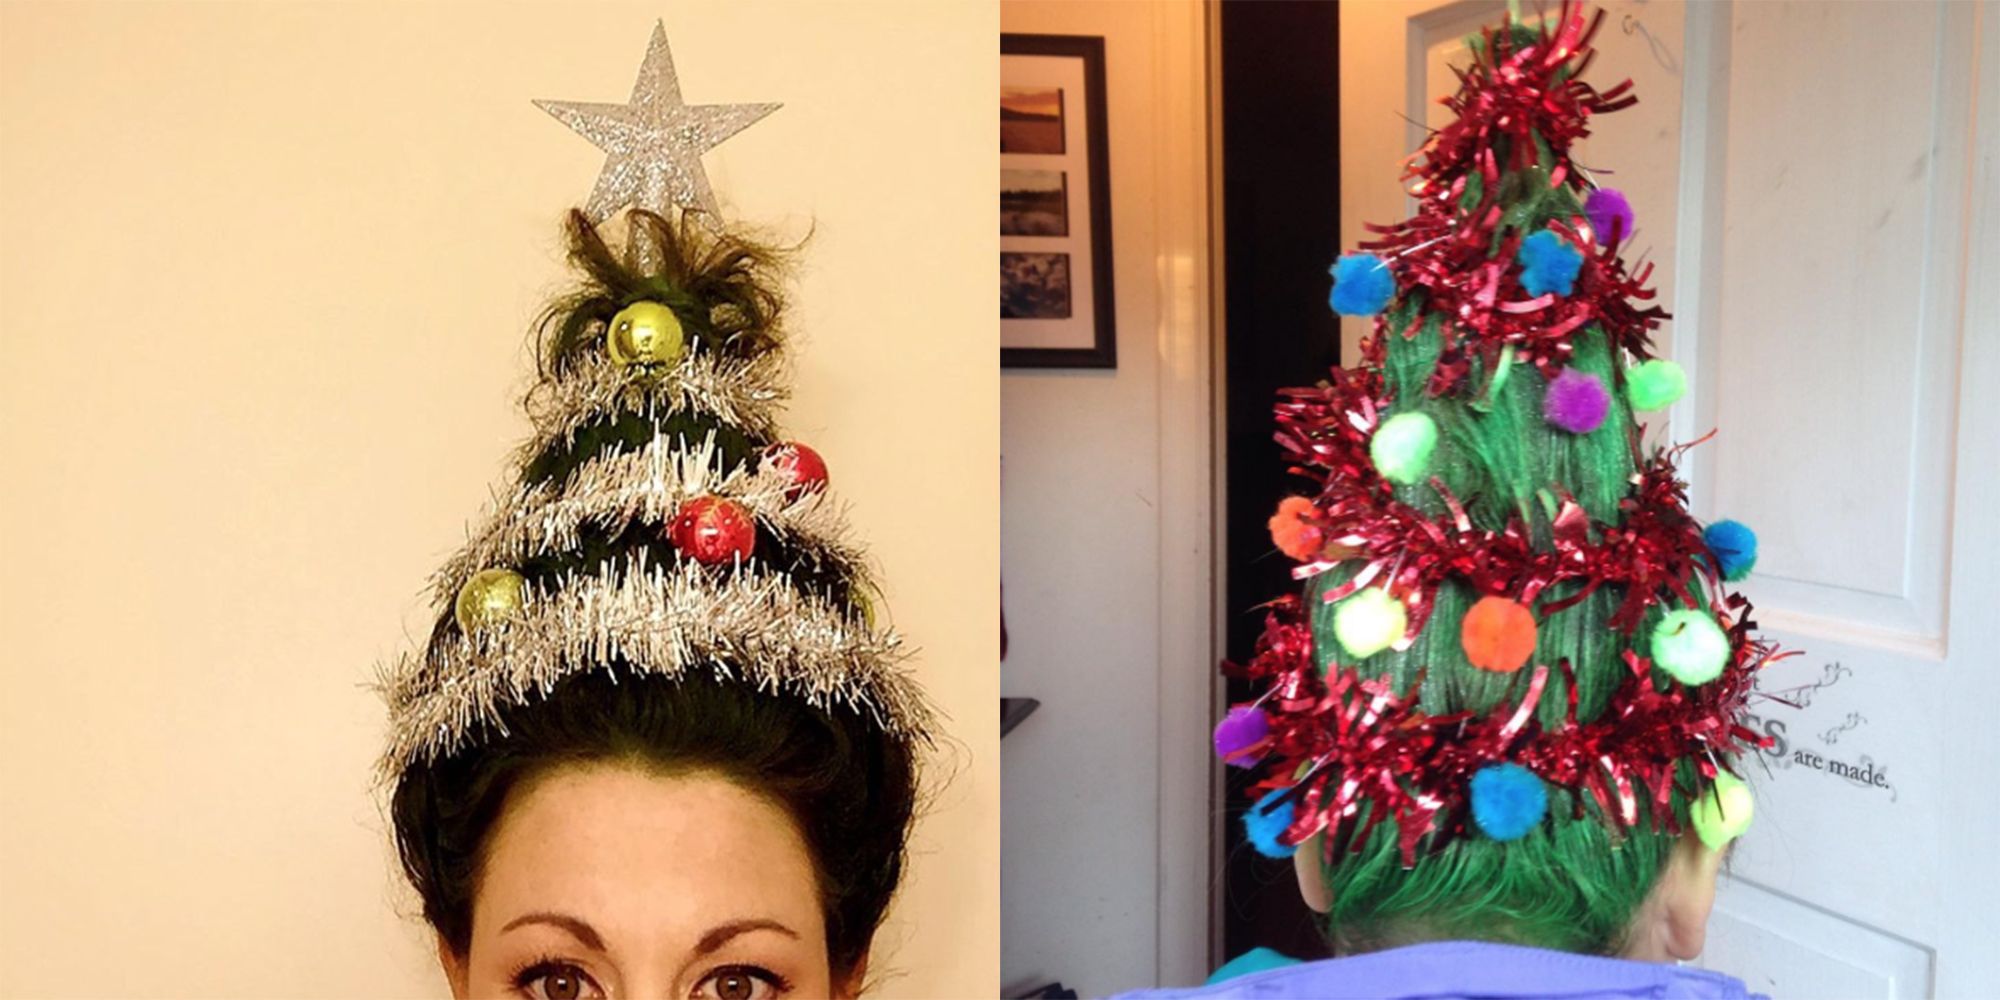 intense christmas - christmas tree hairstyle - are made.